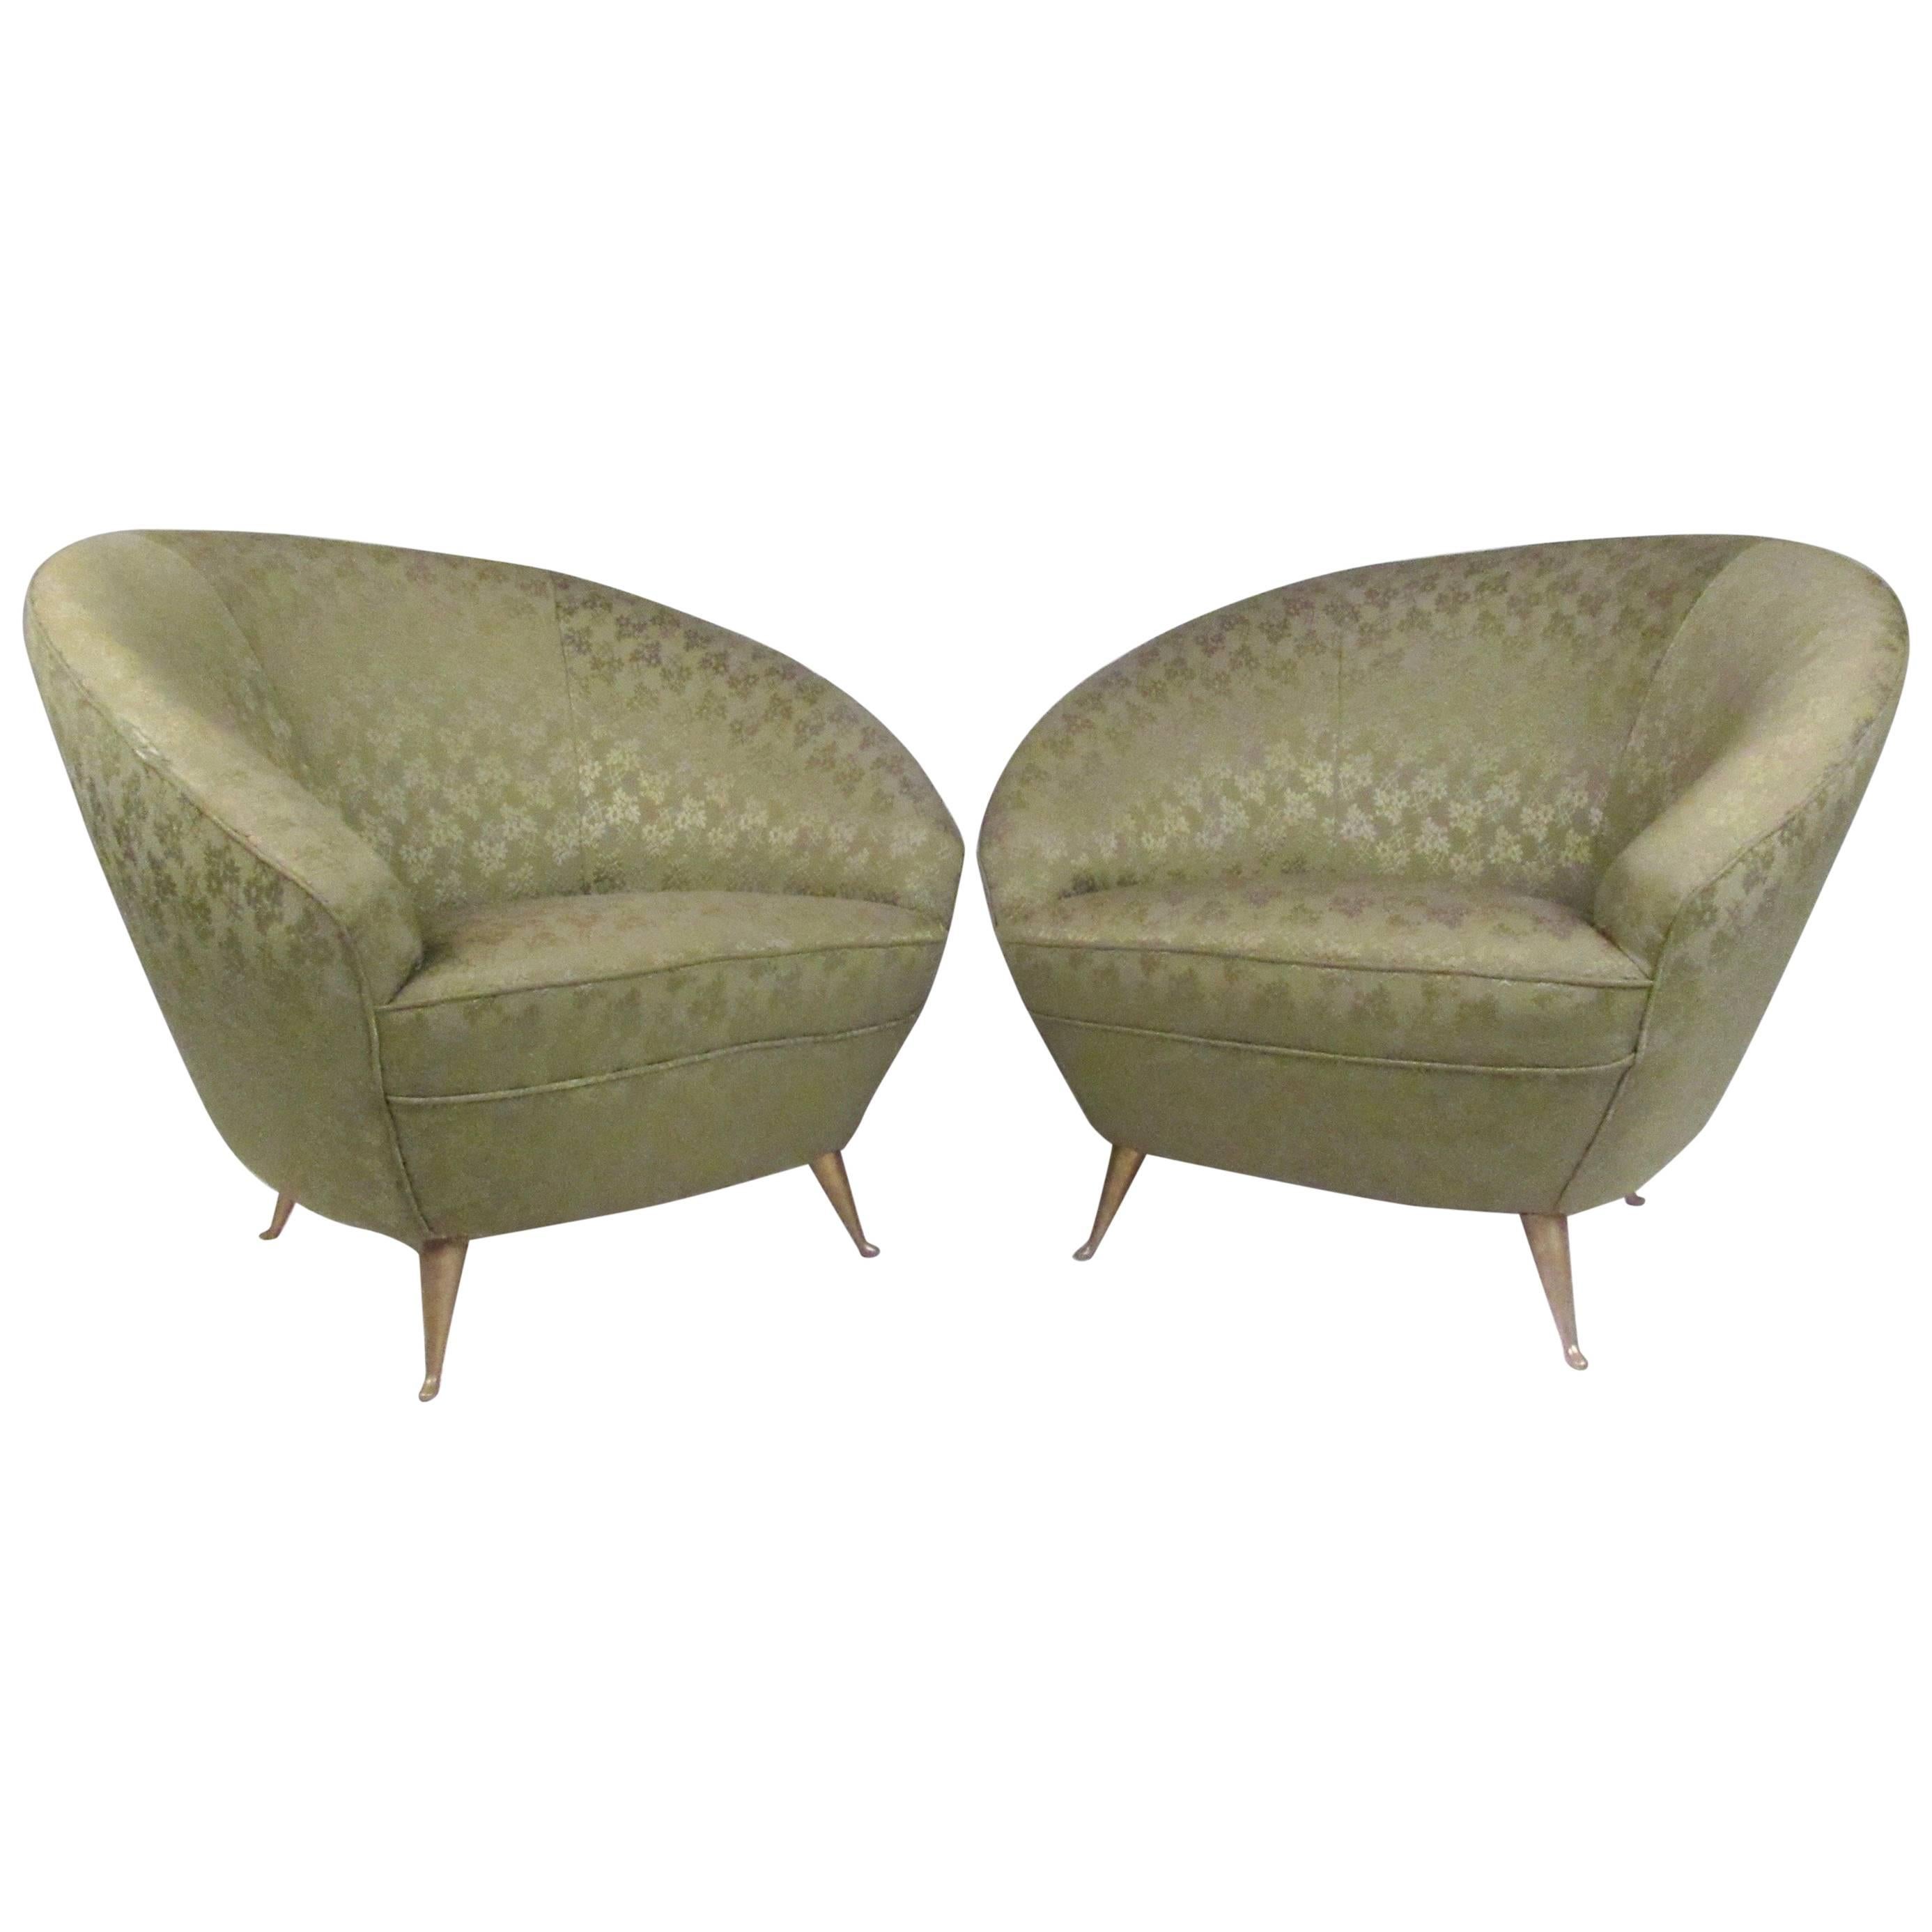 Elegant Pair of Italian Modern Lounge Chairs in the Style of Ico Parisi